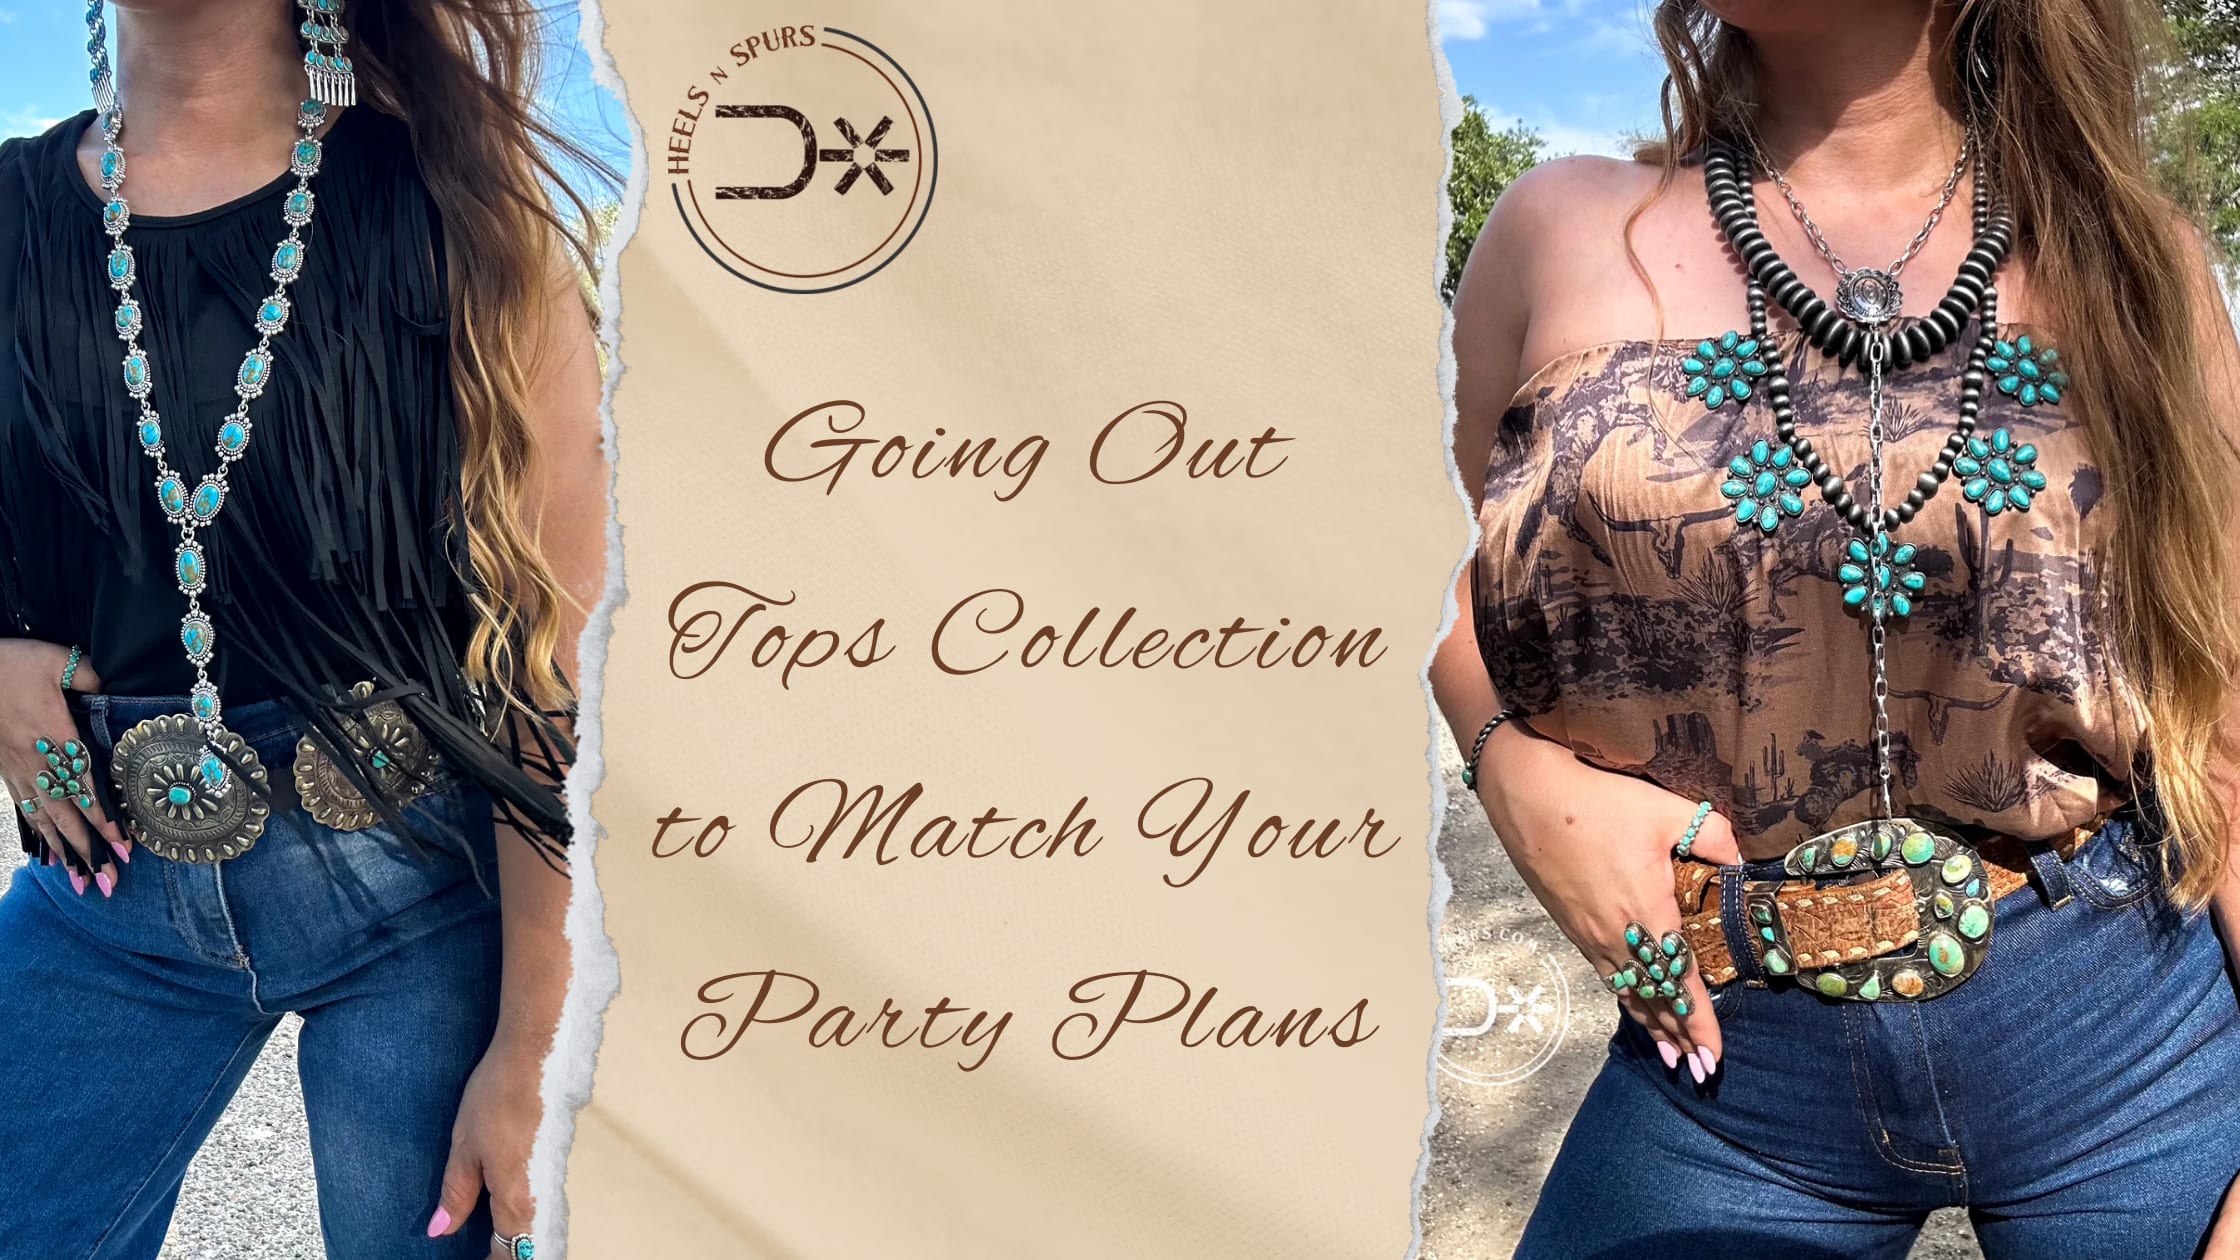 Going Out Tops Collection to Match Your Party Plans | Styled